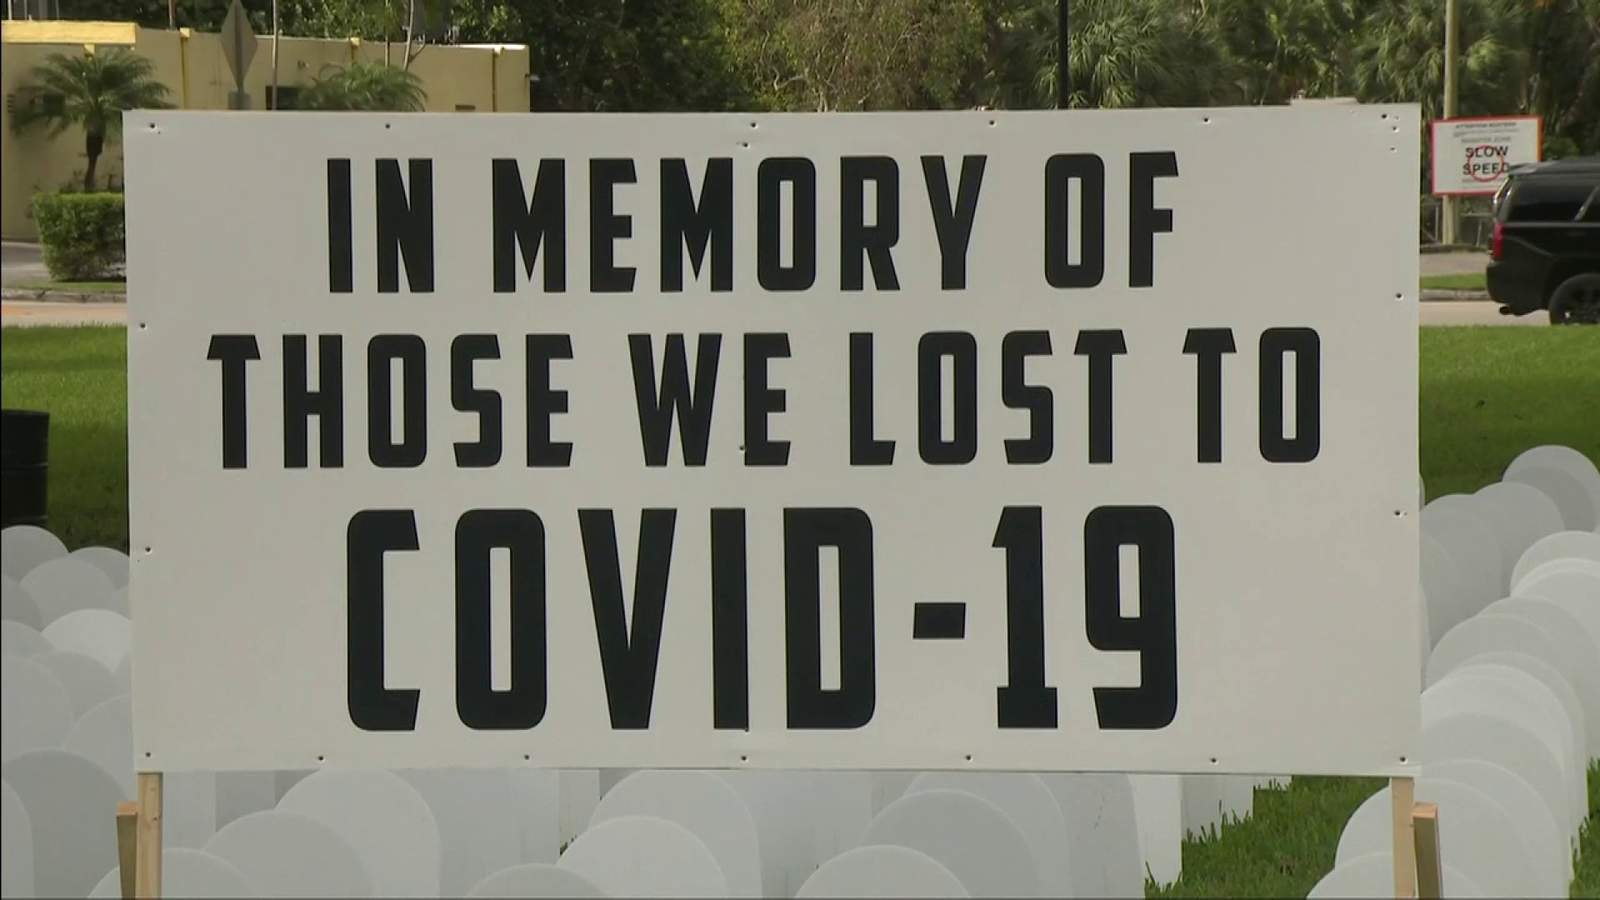 Cemetery calls attention to COVID-19 deaths as virus cases rise in Florida